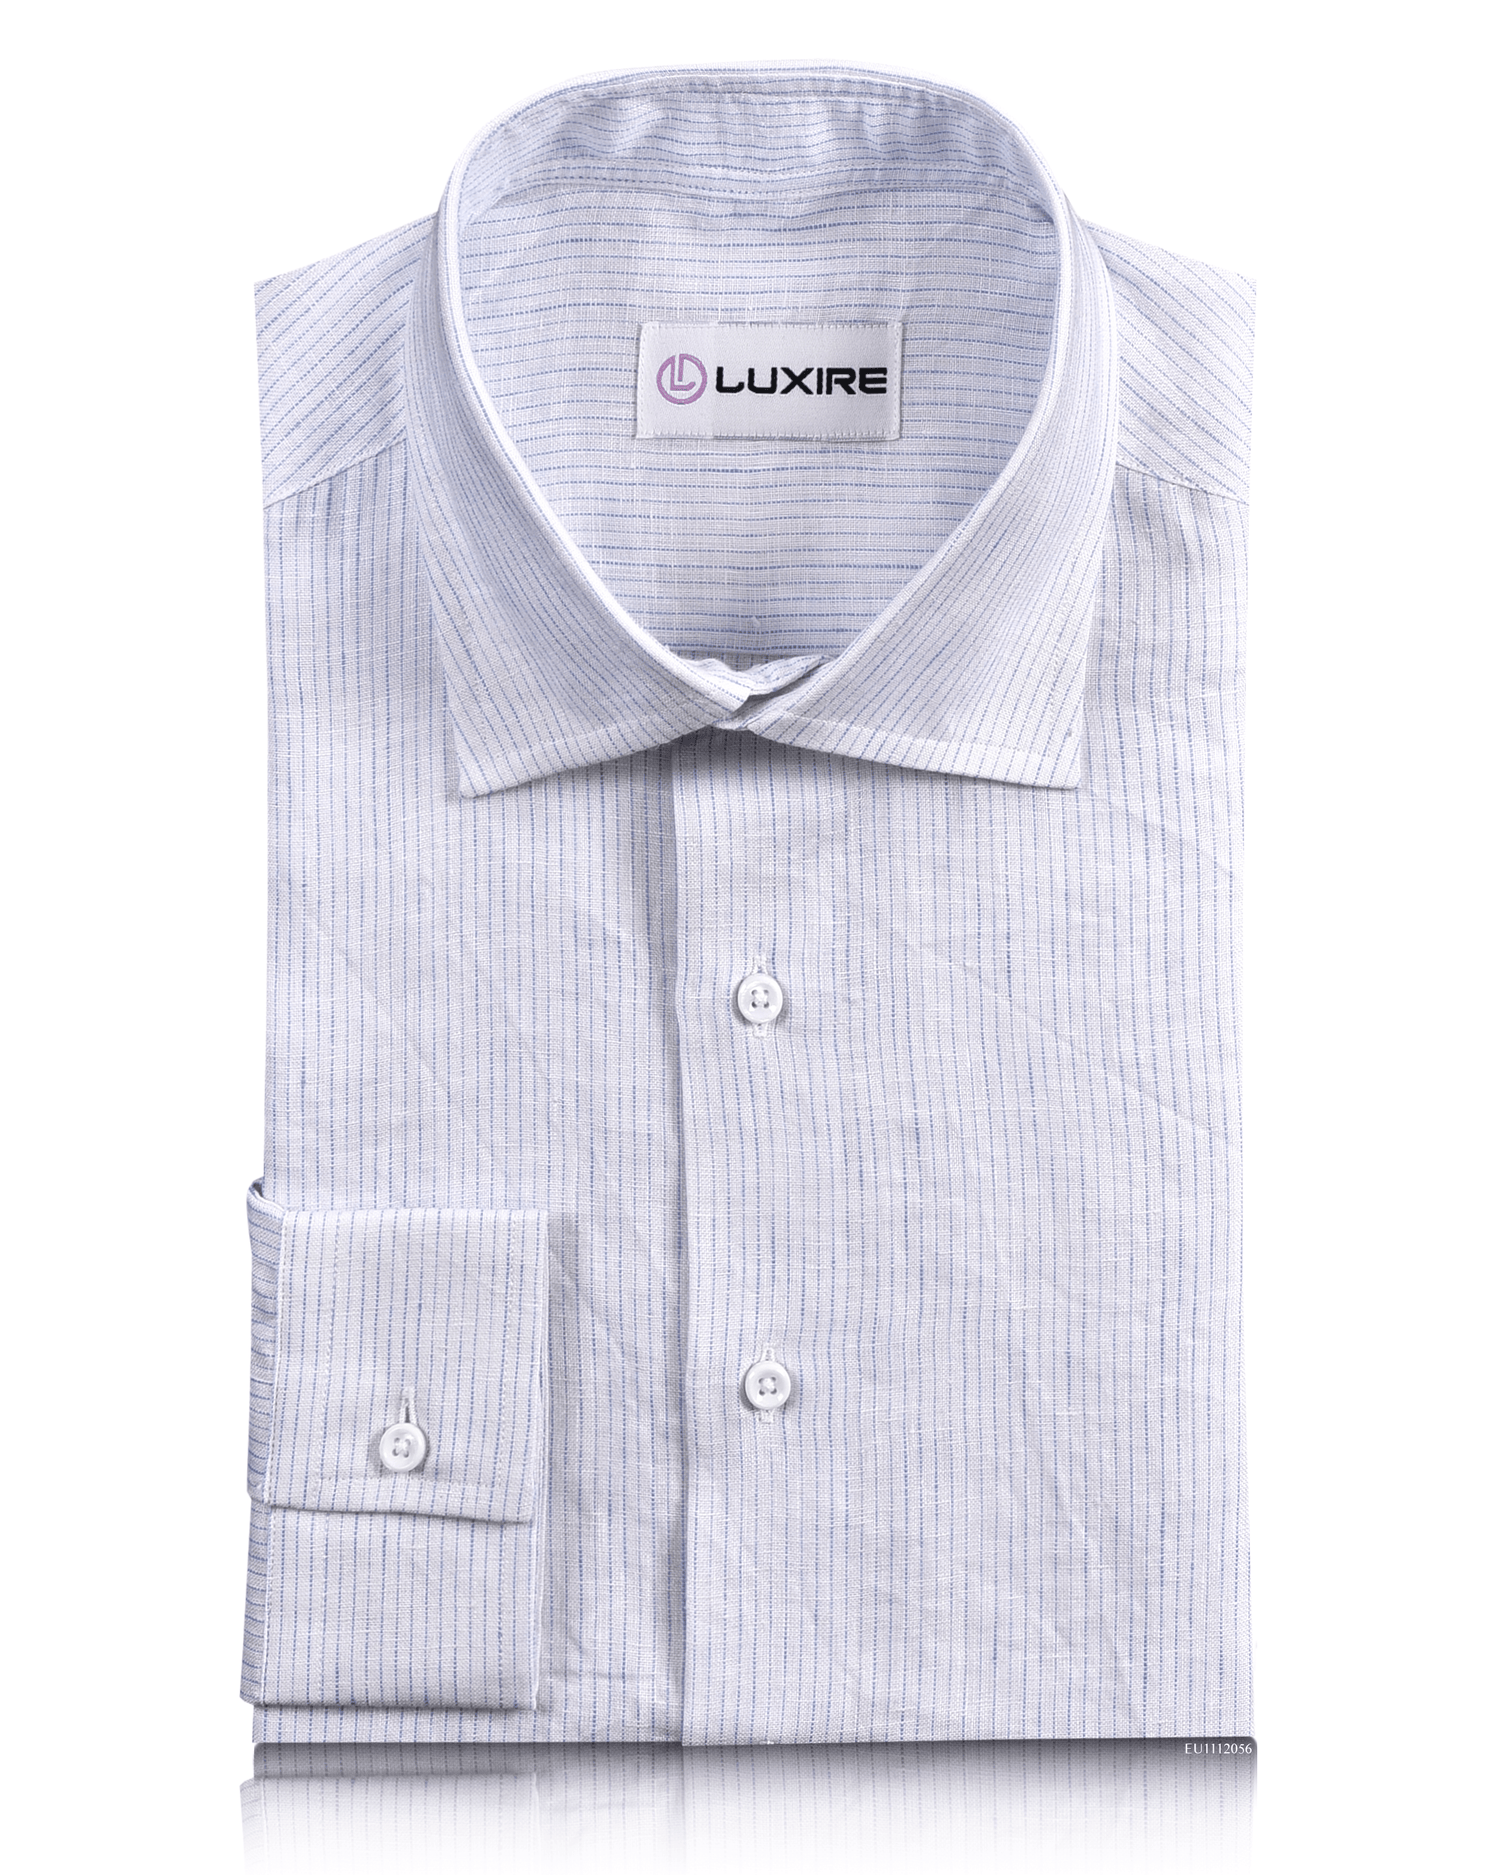 Front of the custom linen shirt for men in white with thin blue stripes by Luxire Clothing